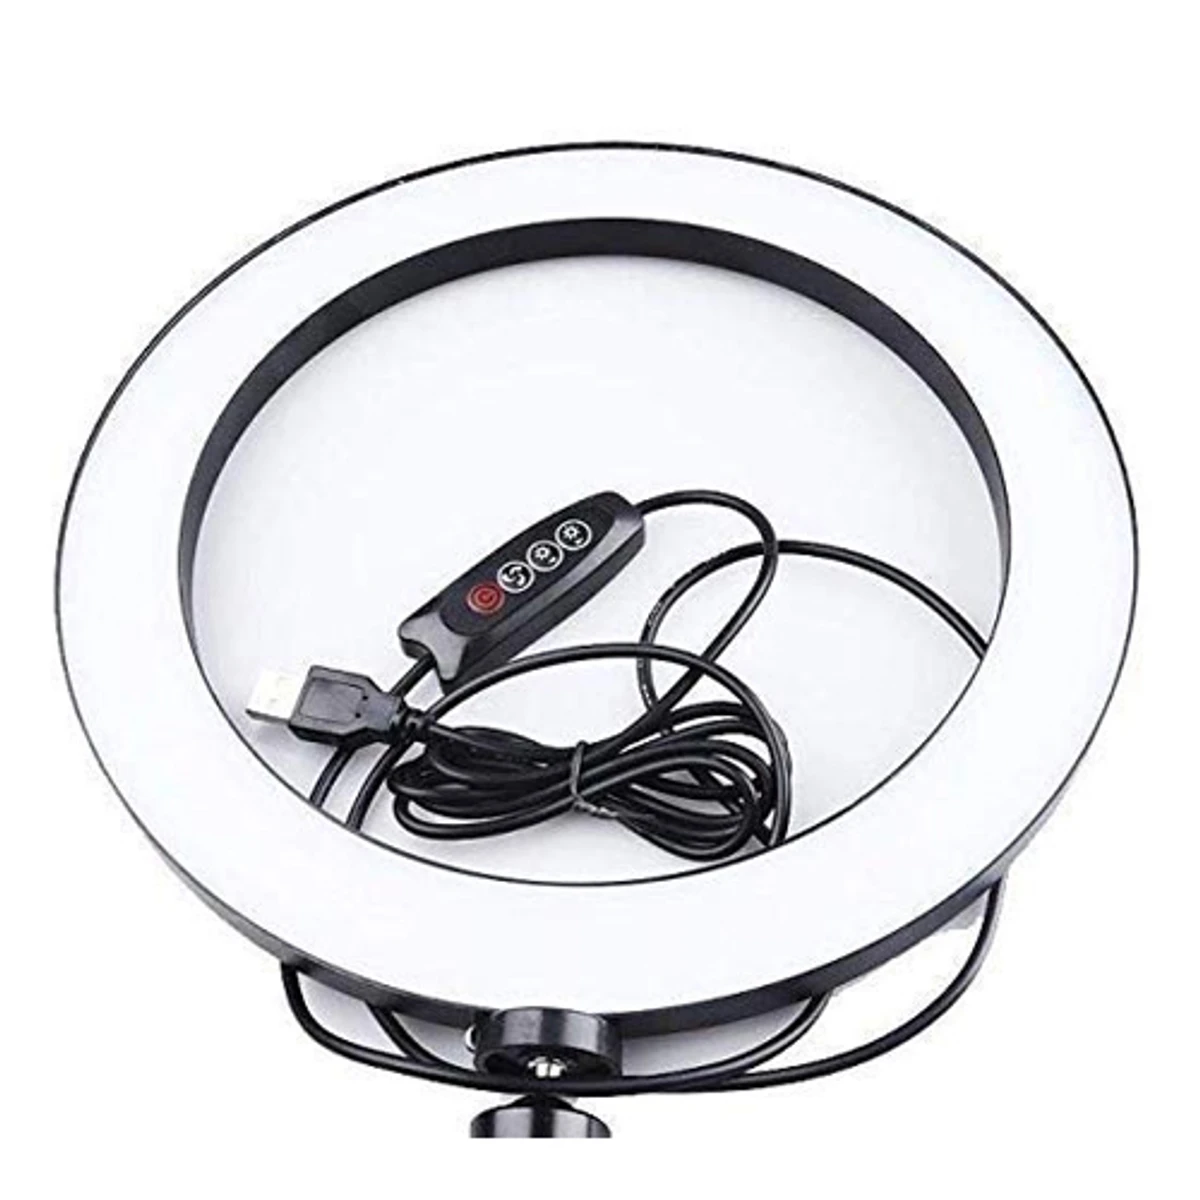 Led Ring Light For Smartphone- Adjustable Brightness (Only 10 Inch Ring Light Without Stand)